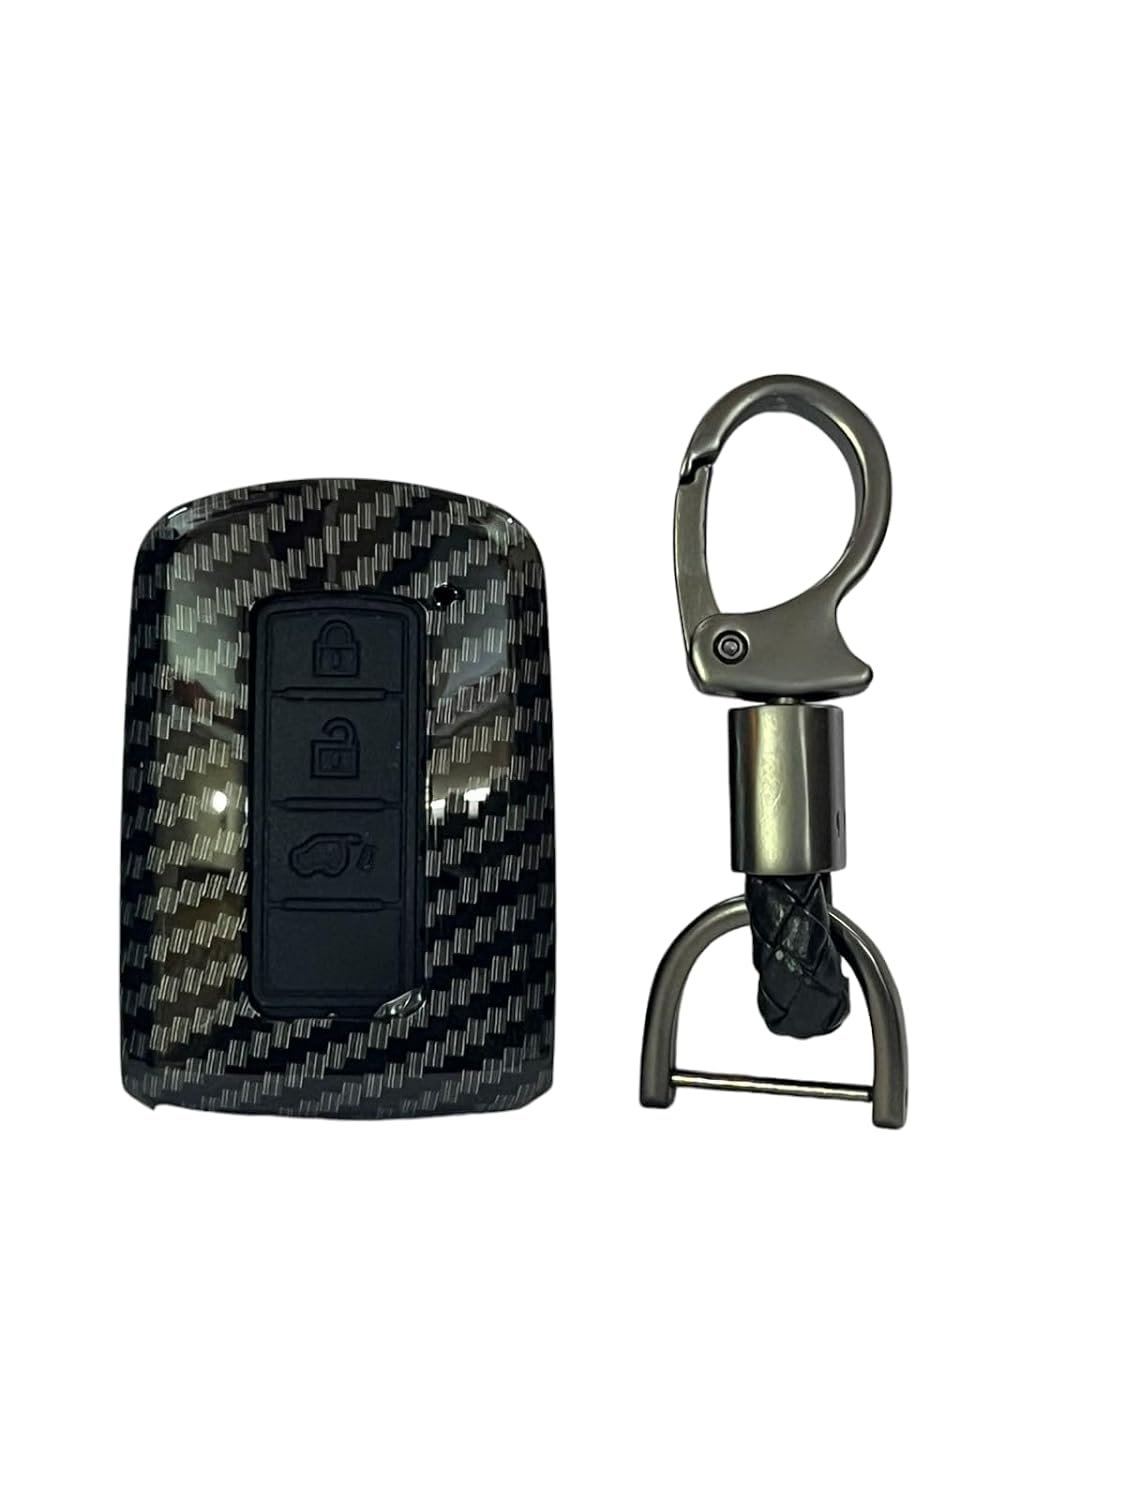 Carbon Fiber ABS Car Key Cover Compatible with Toyota Corolla Altis Smart Key (Key Chain Included) Image 